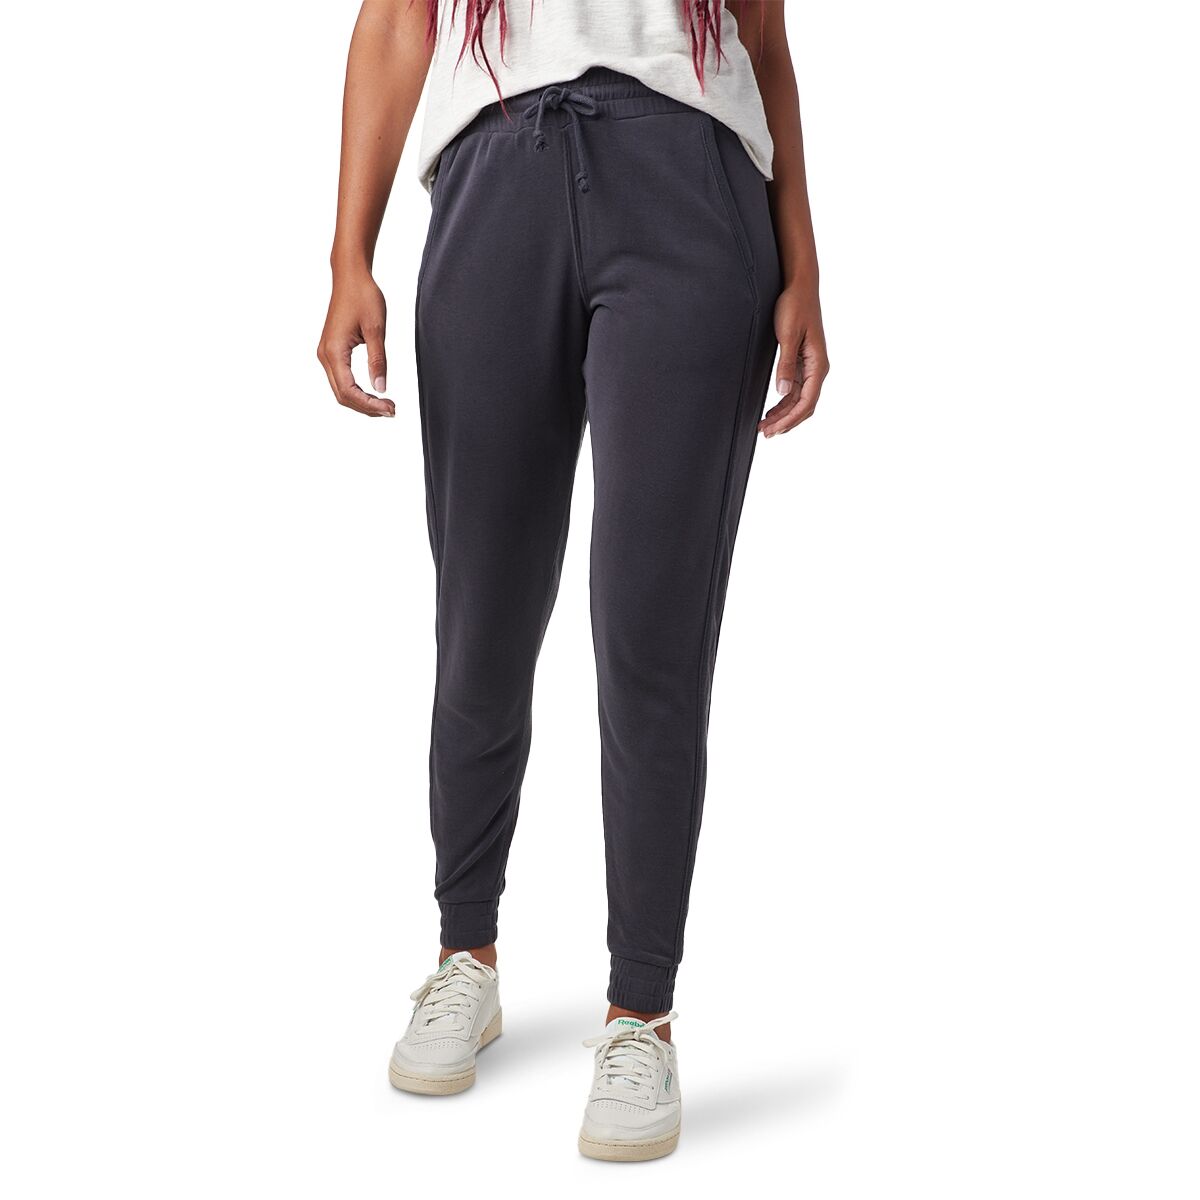 FP Movement Back Into It Jogger - Women's - Clothing